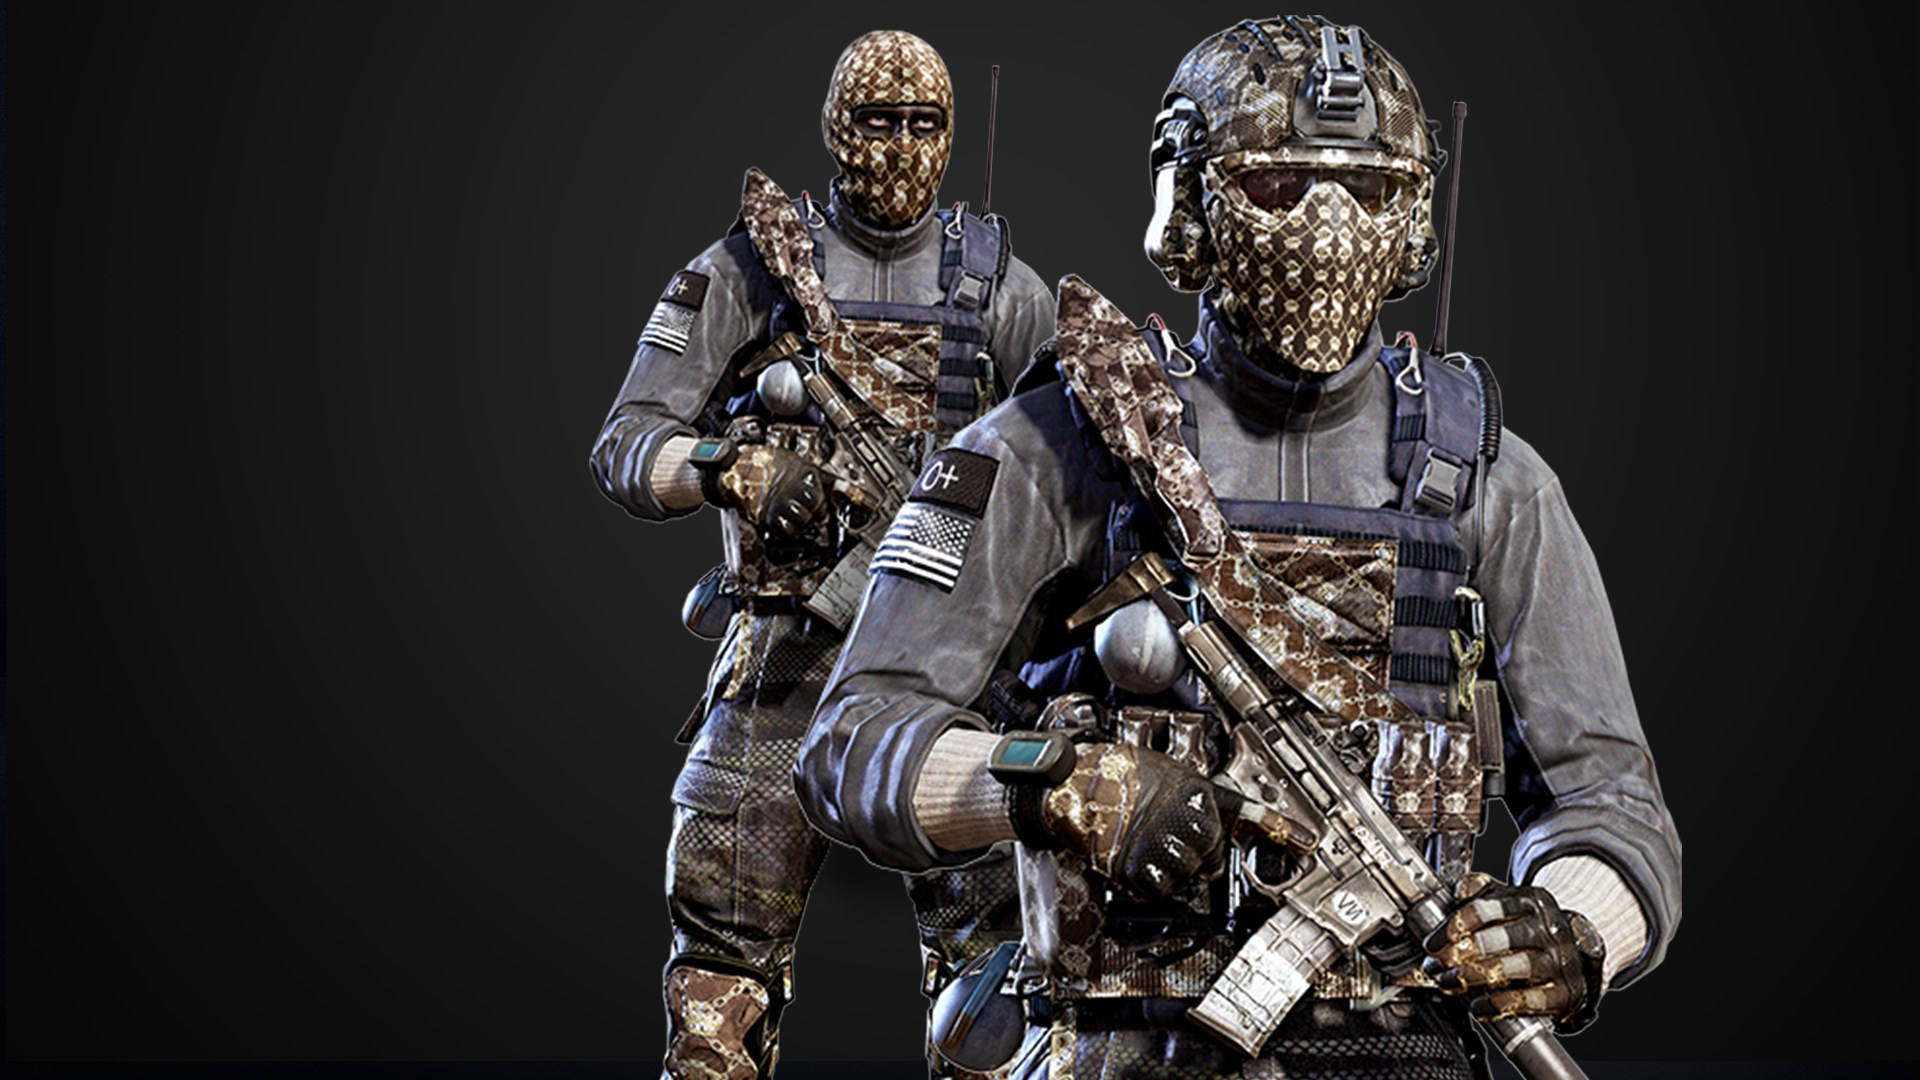 call of duty ghosts characters